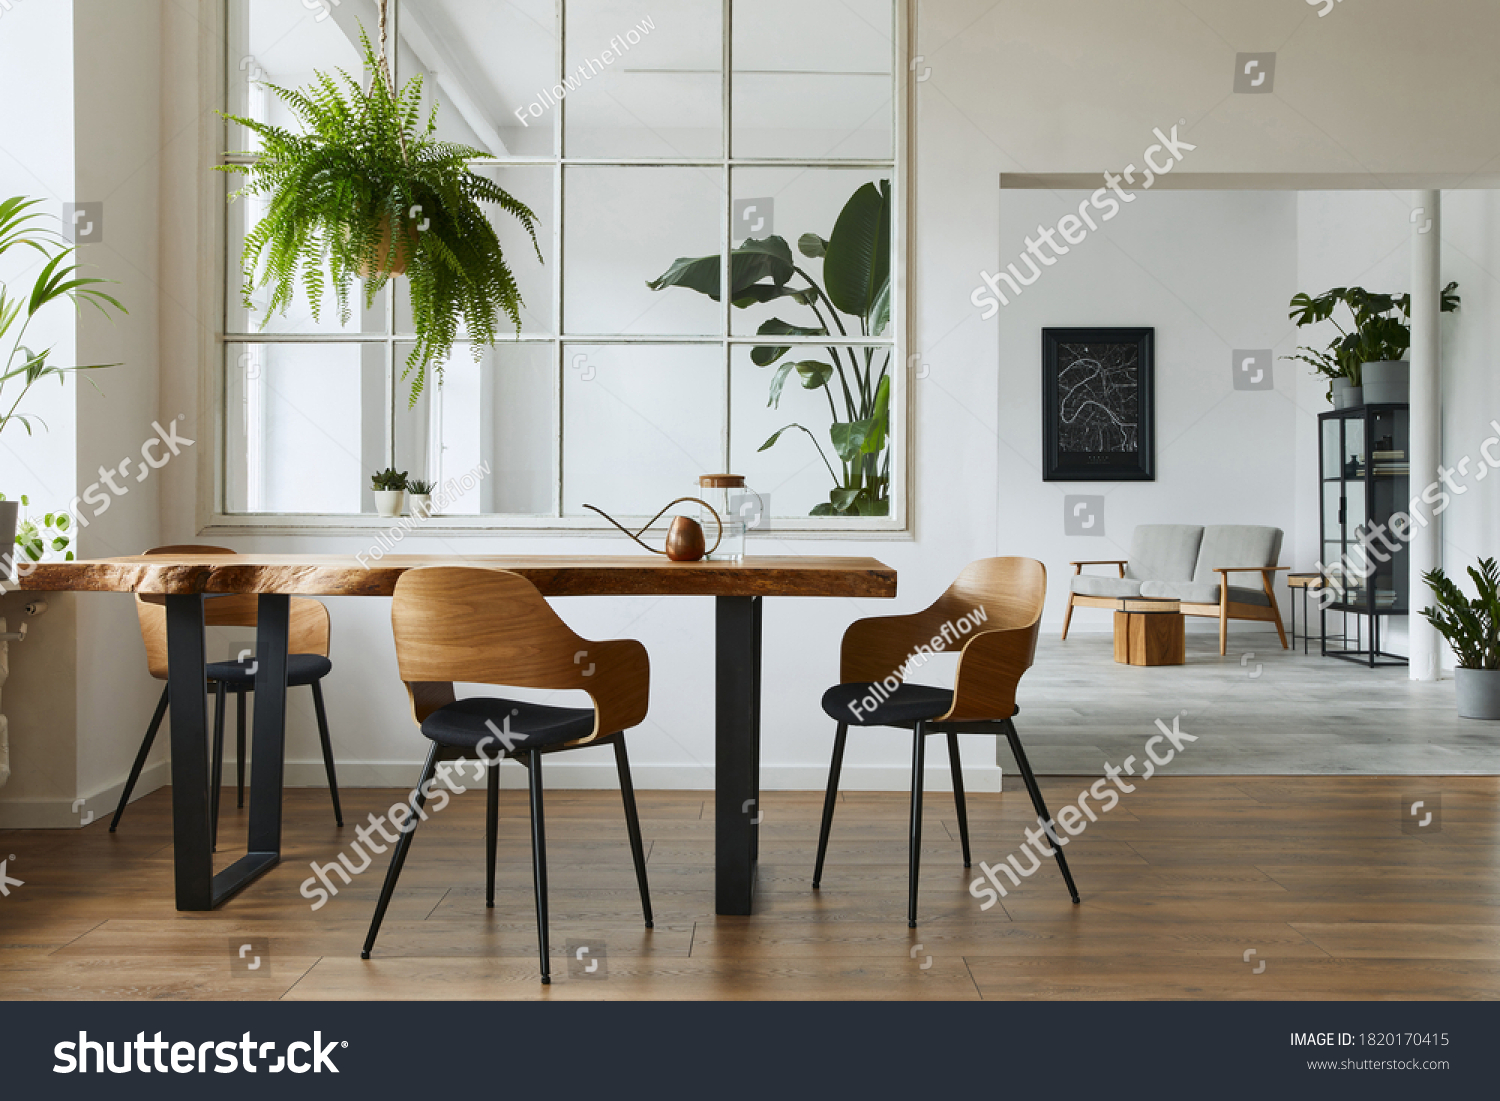 Stylish and botany interior of dining room with design craft wooden table, chairs, a lof of plants, big window, poster map and elegant accessories in modern home decor. Template. #1820170415